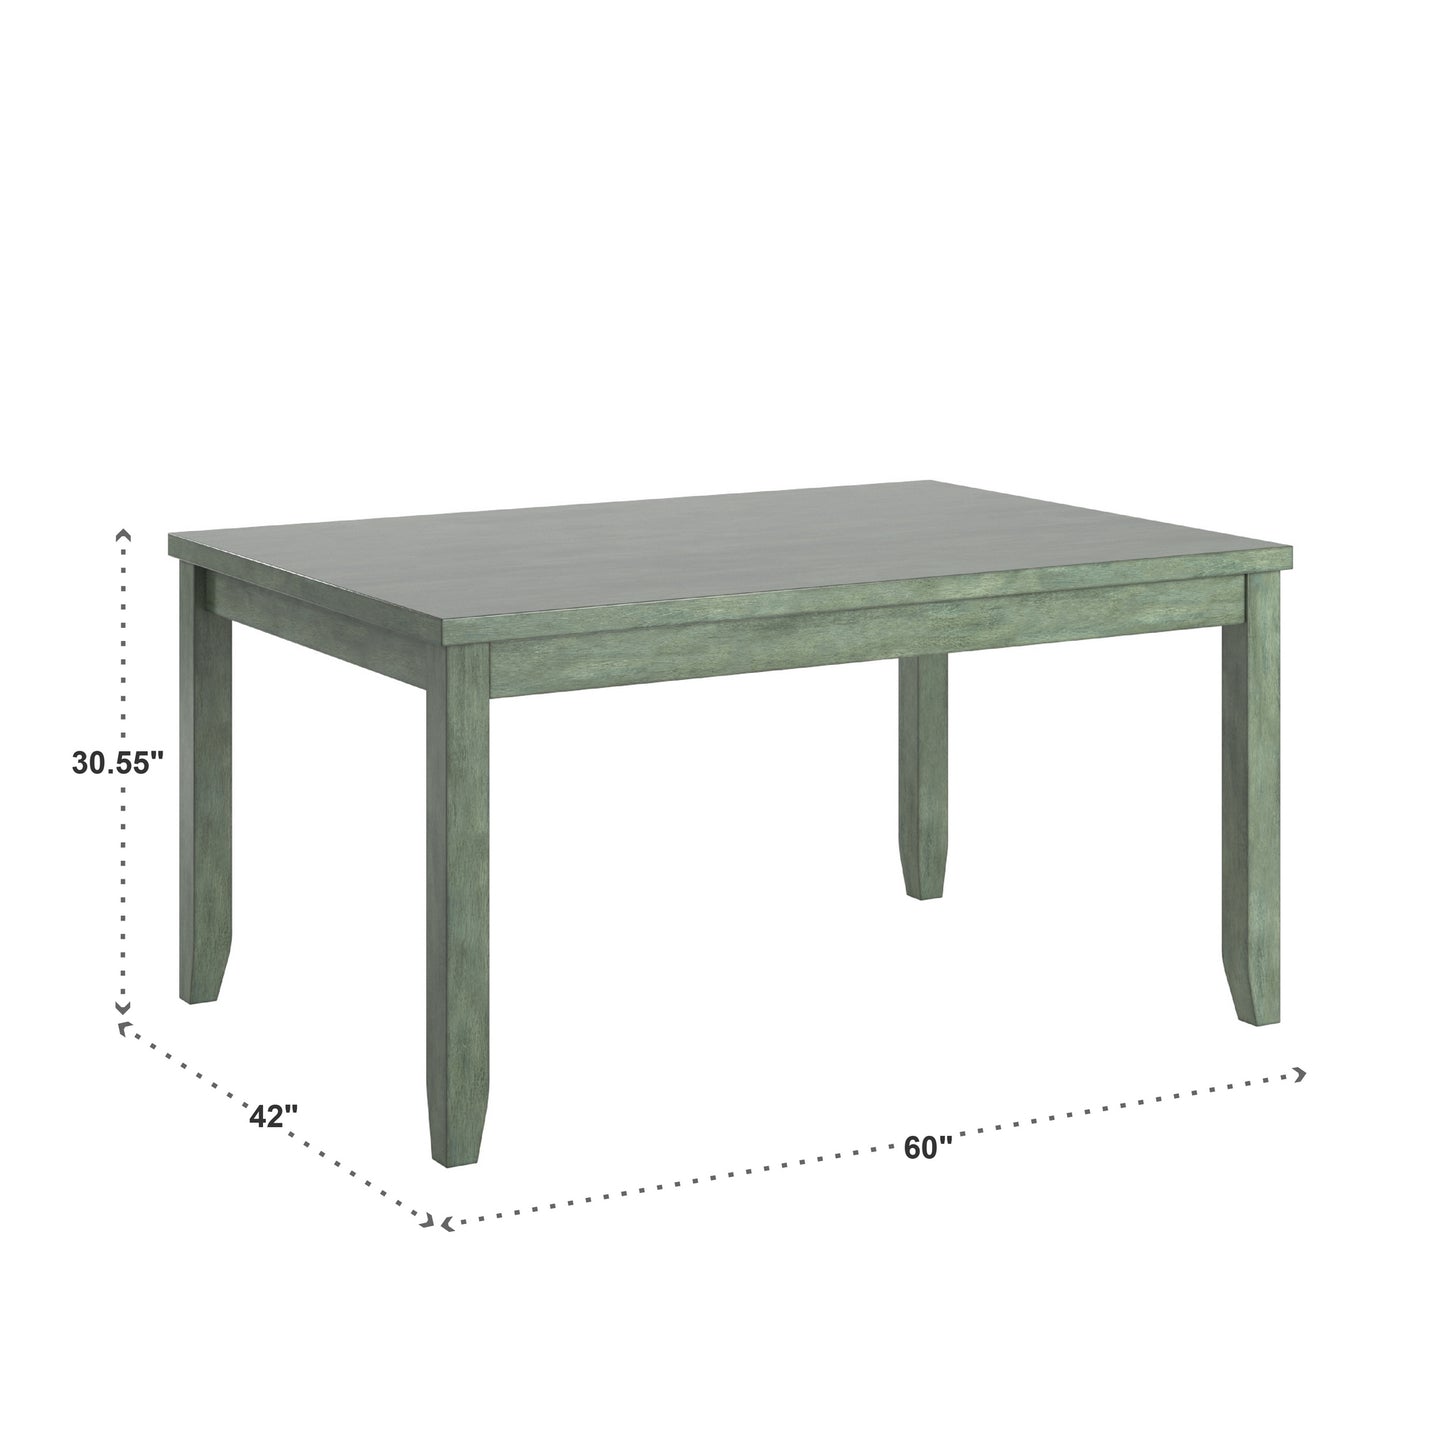 Solid Wood Rectangular Dining Table with Two Drawers - Antique Sage